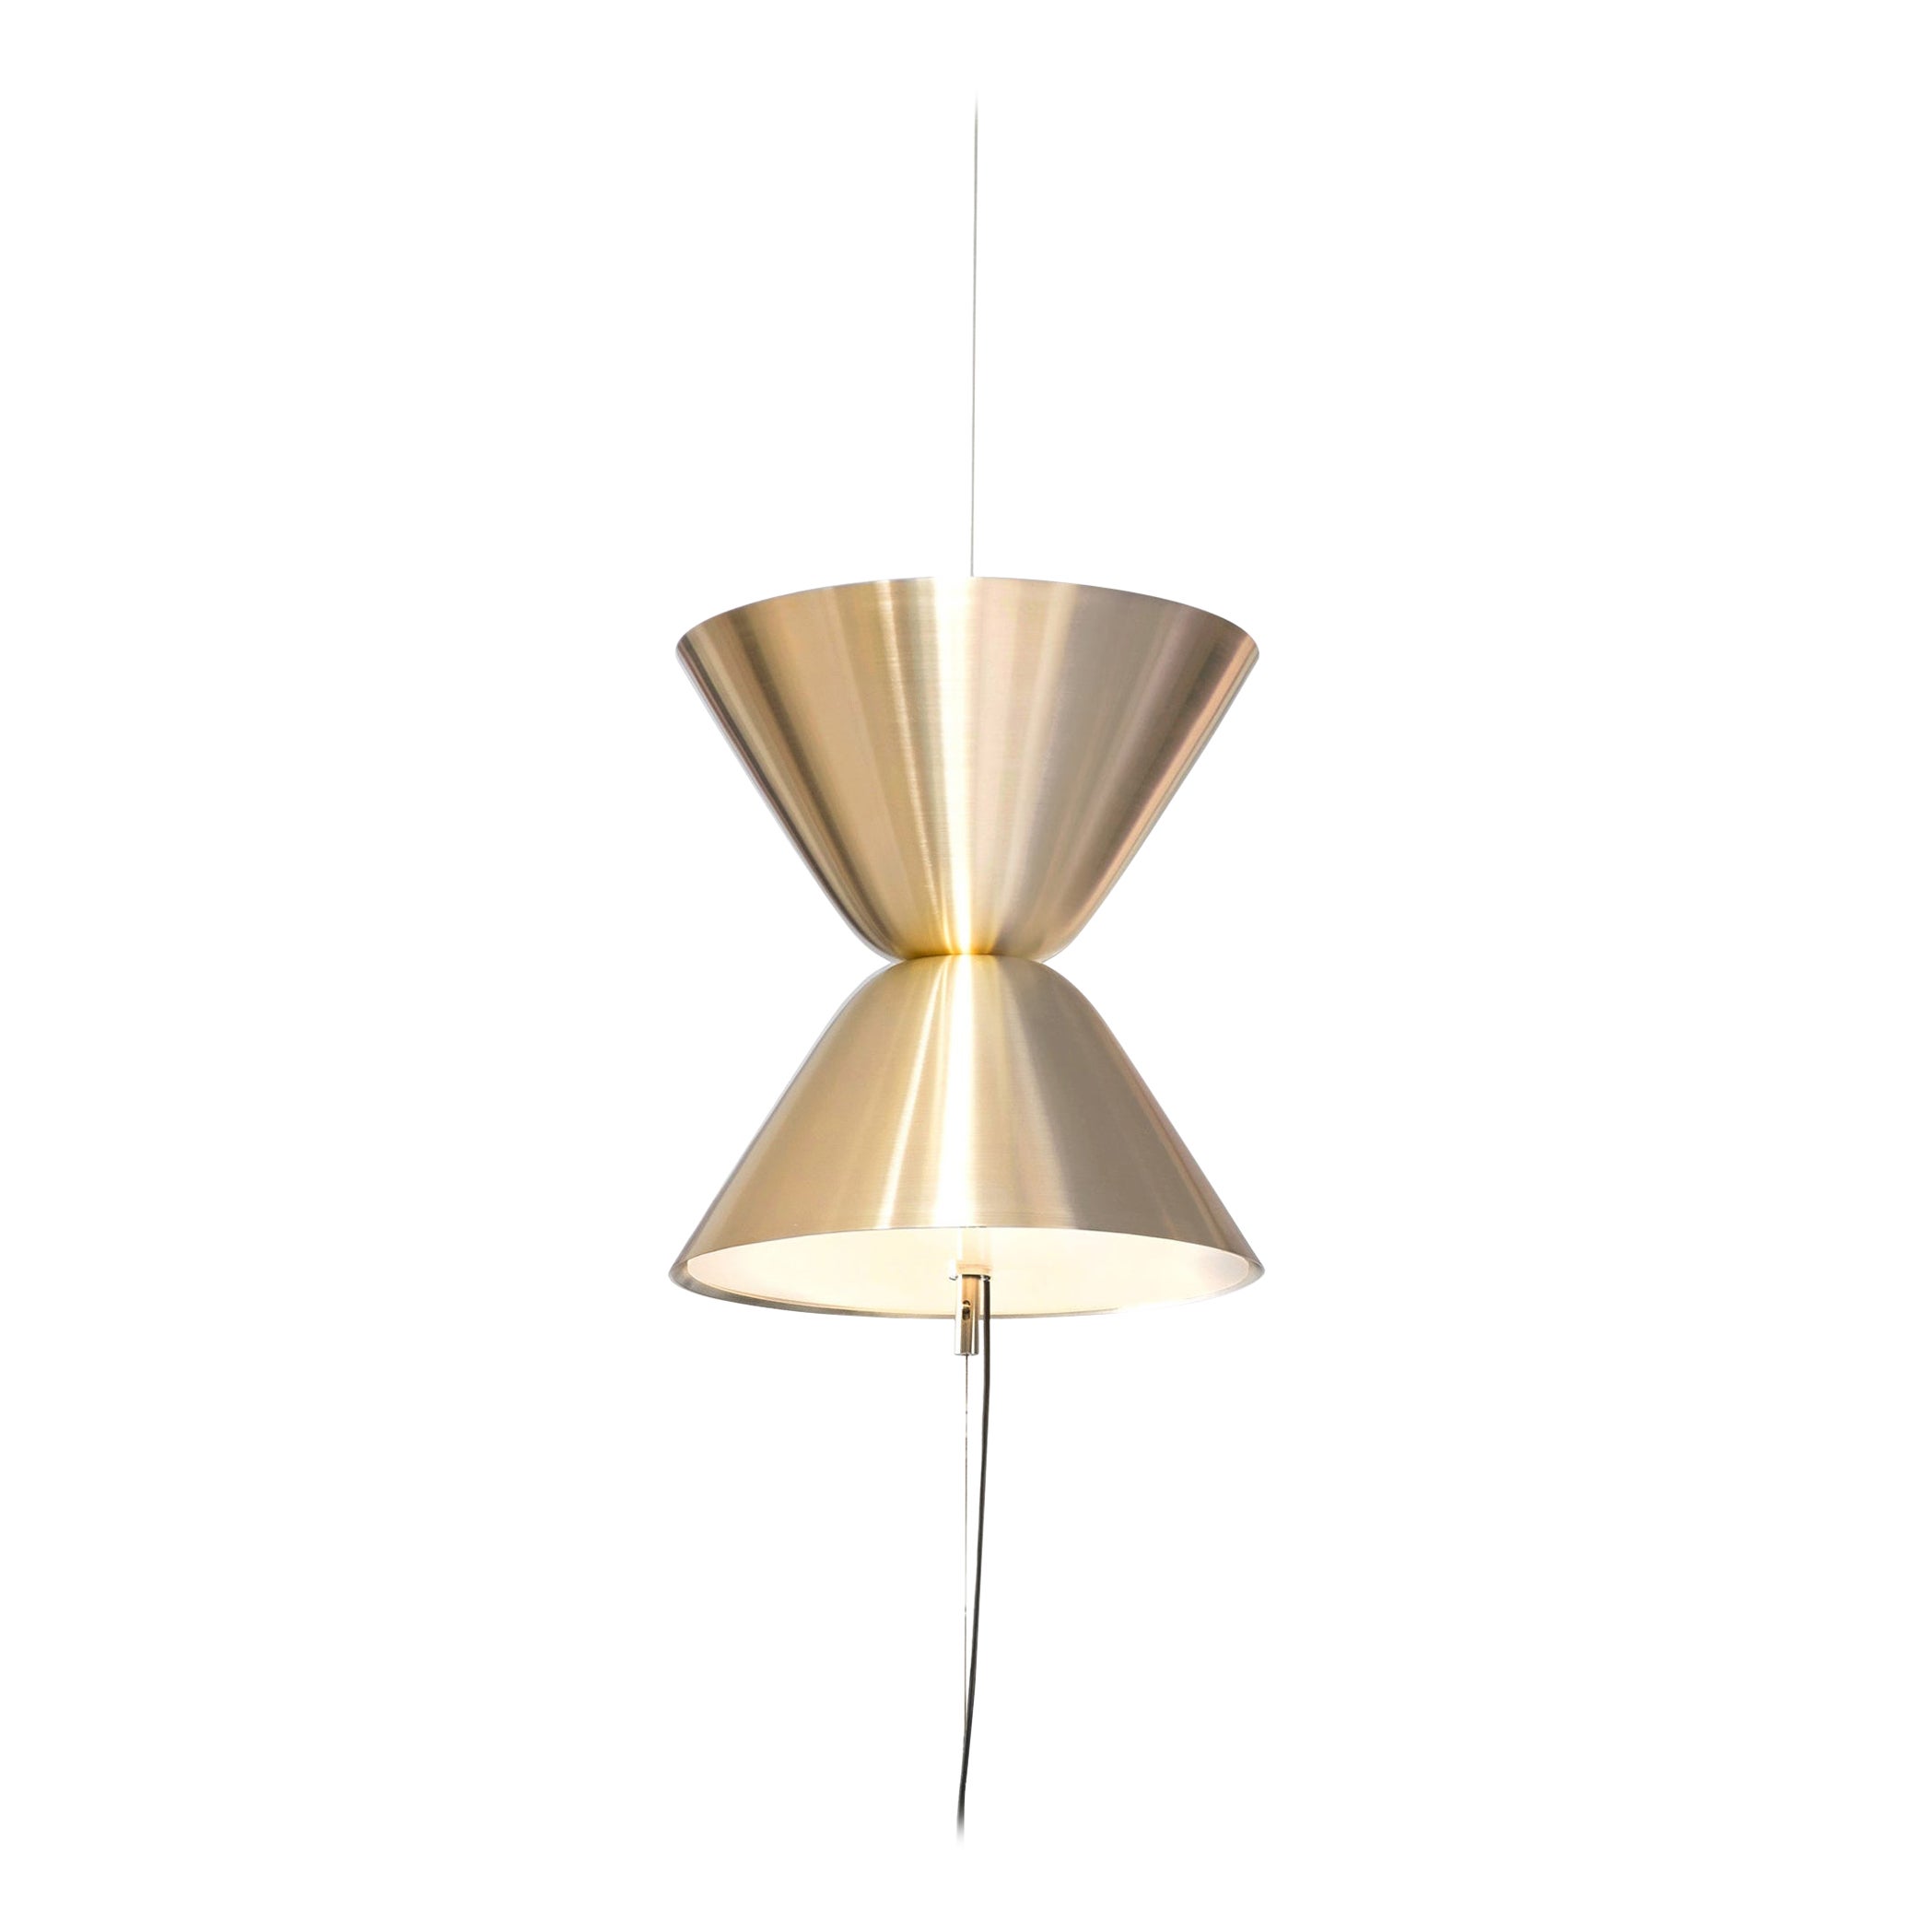 Daniel Becker 'Aureole' Suspended Floor Lamp in Brushed Brass for Moss Objects For Sale